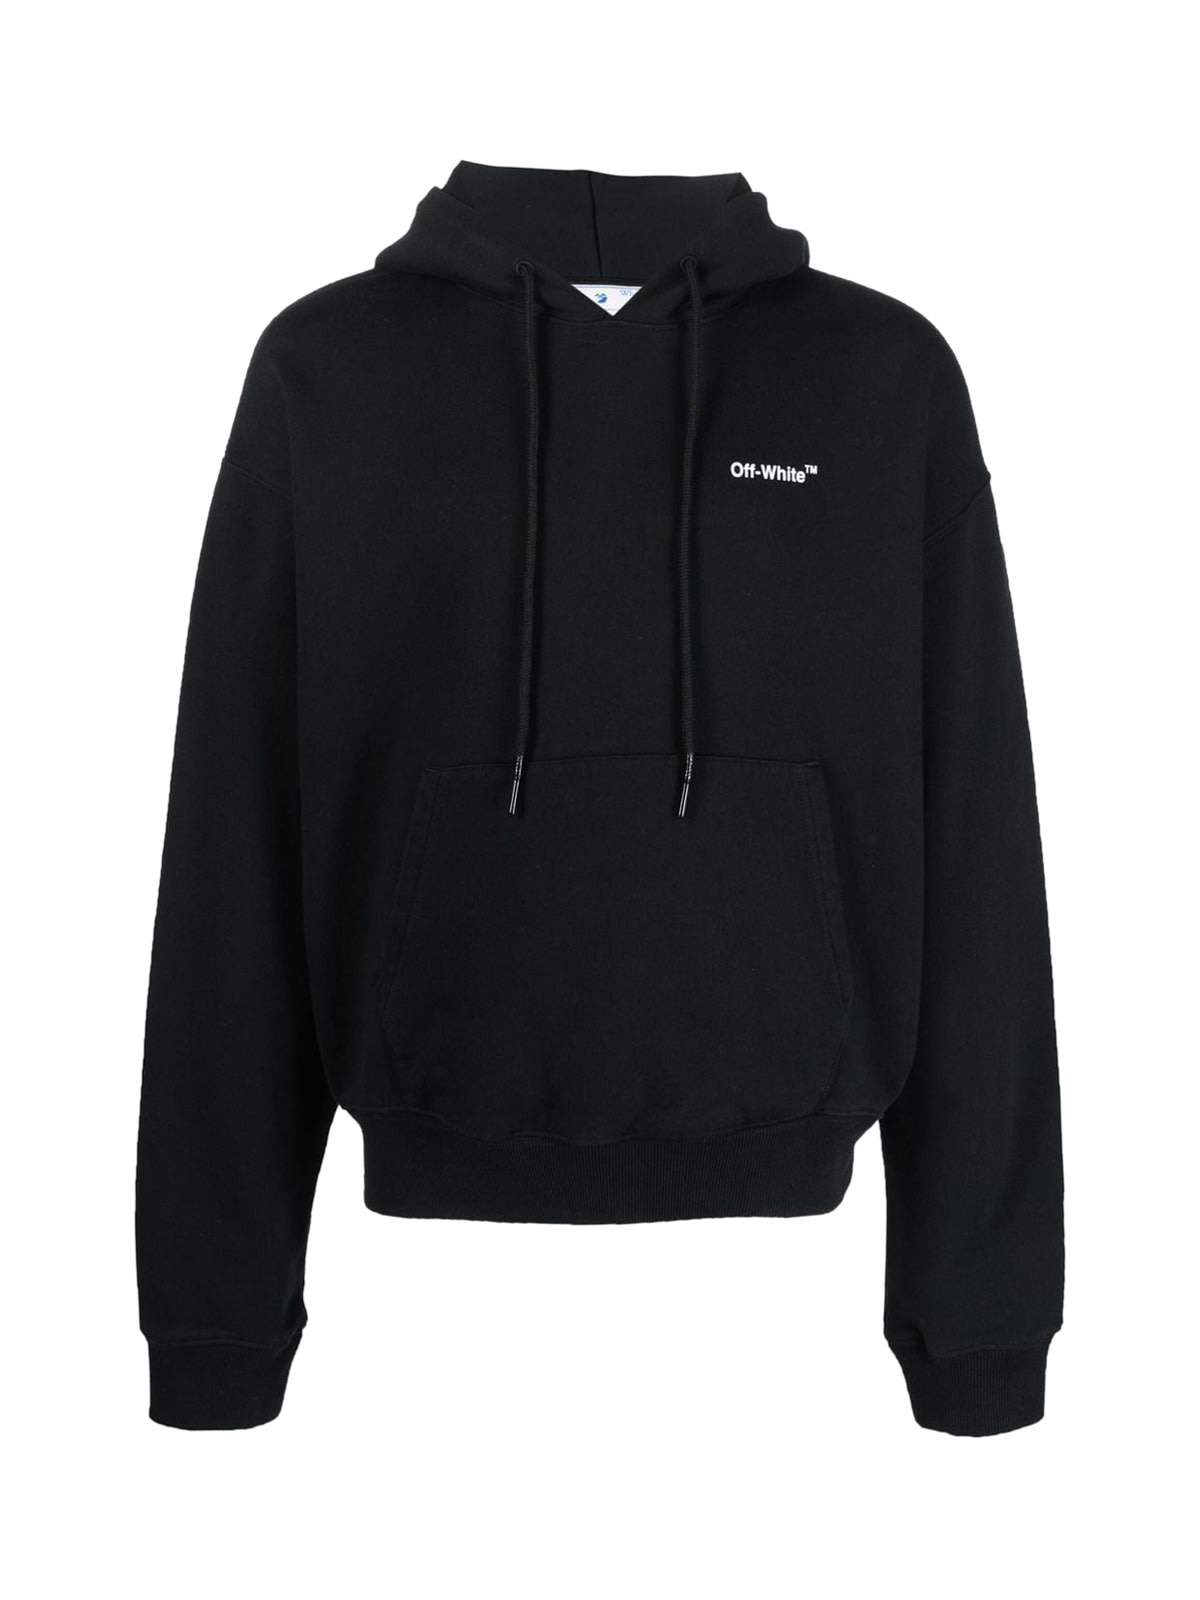 Off-White Caravag Arrow Over Hoodie